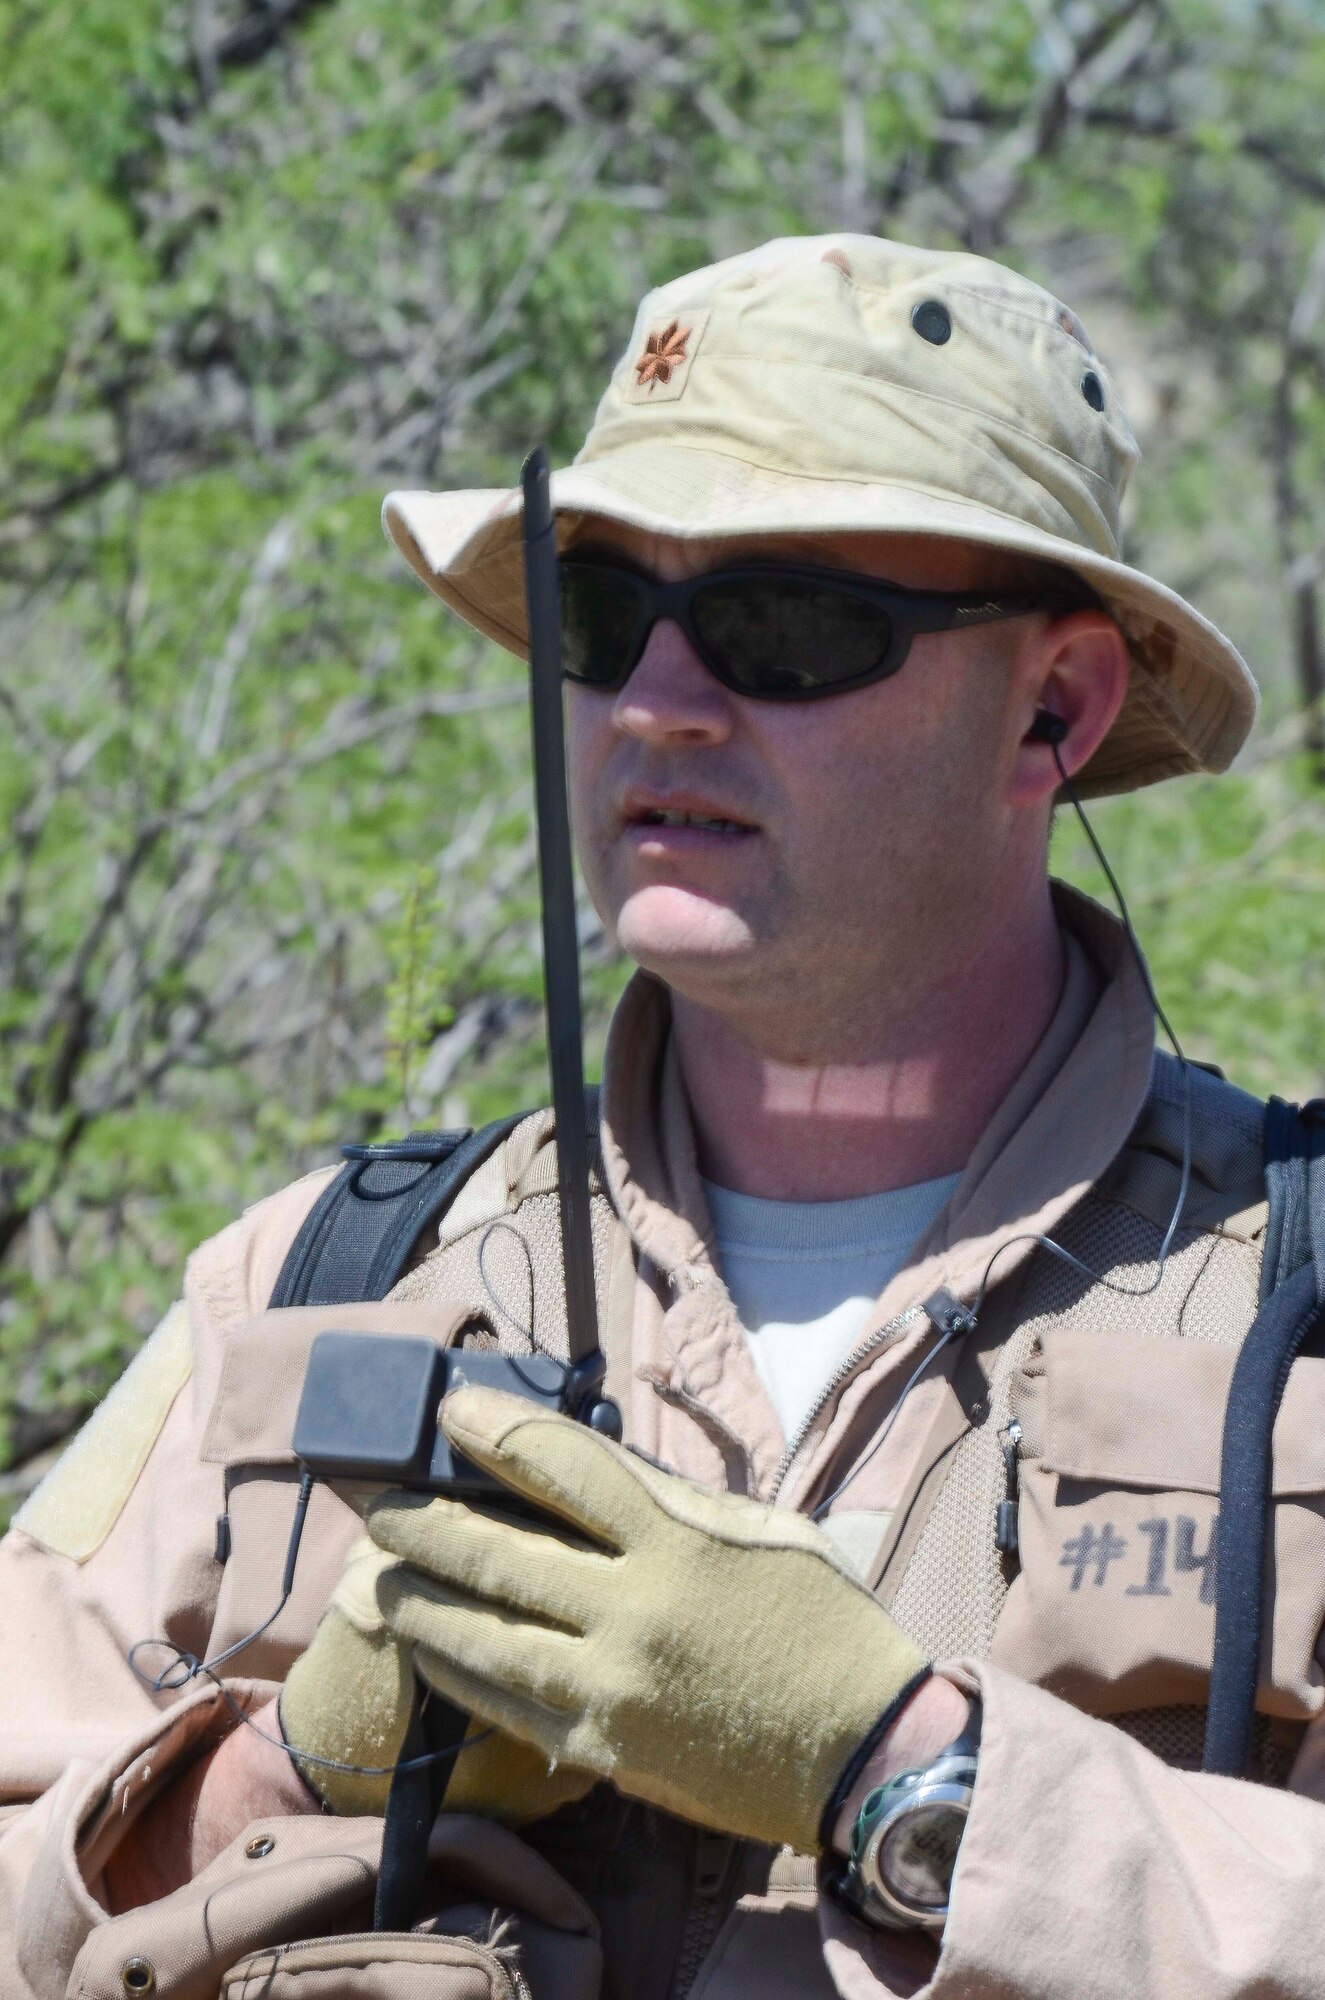 Maj. John Reed, 12th Air Force (Air Forces Southern) executive officer, radios for help during a Combat Search and Rescue Exercise in Southern Ariz., April 29, 2014. The main objective of this exercise was to effectively integrate communications across joint platforms to authenticate, locate and protect isolated personnel while successfully extracting them. (U.S. Air Force photo by Staff Sgt. Adam Grant/Released)